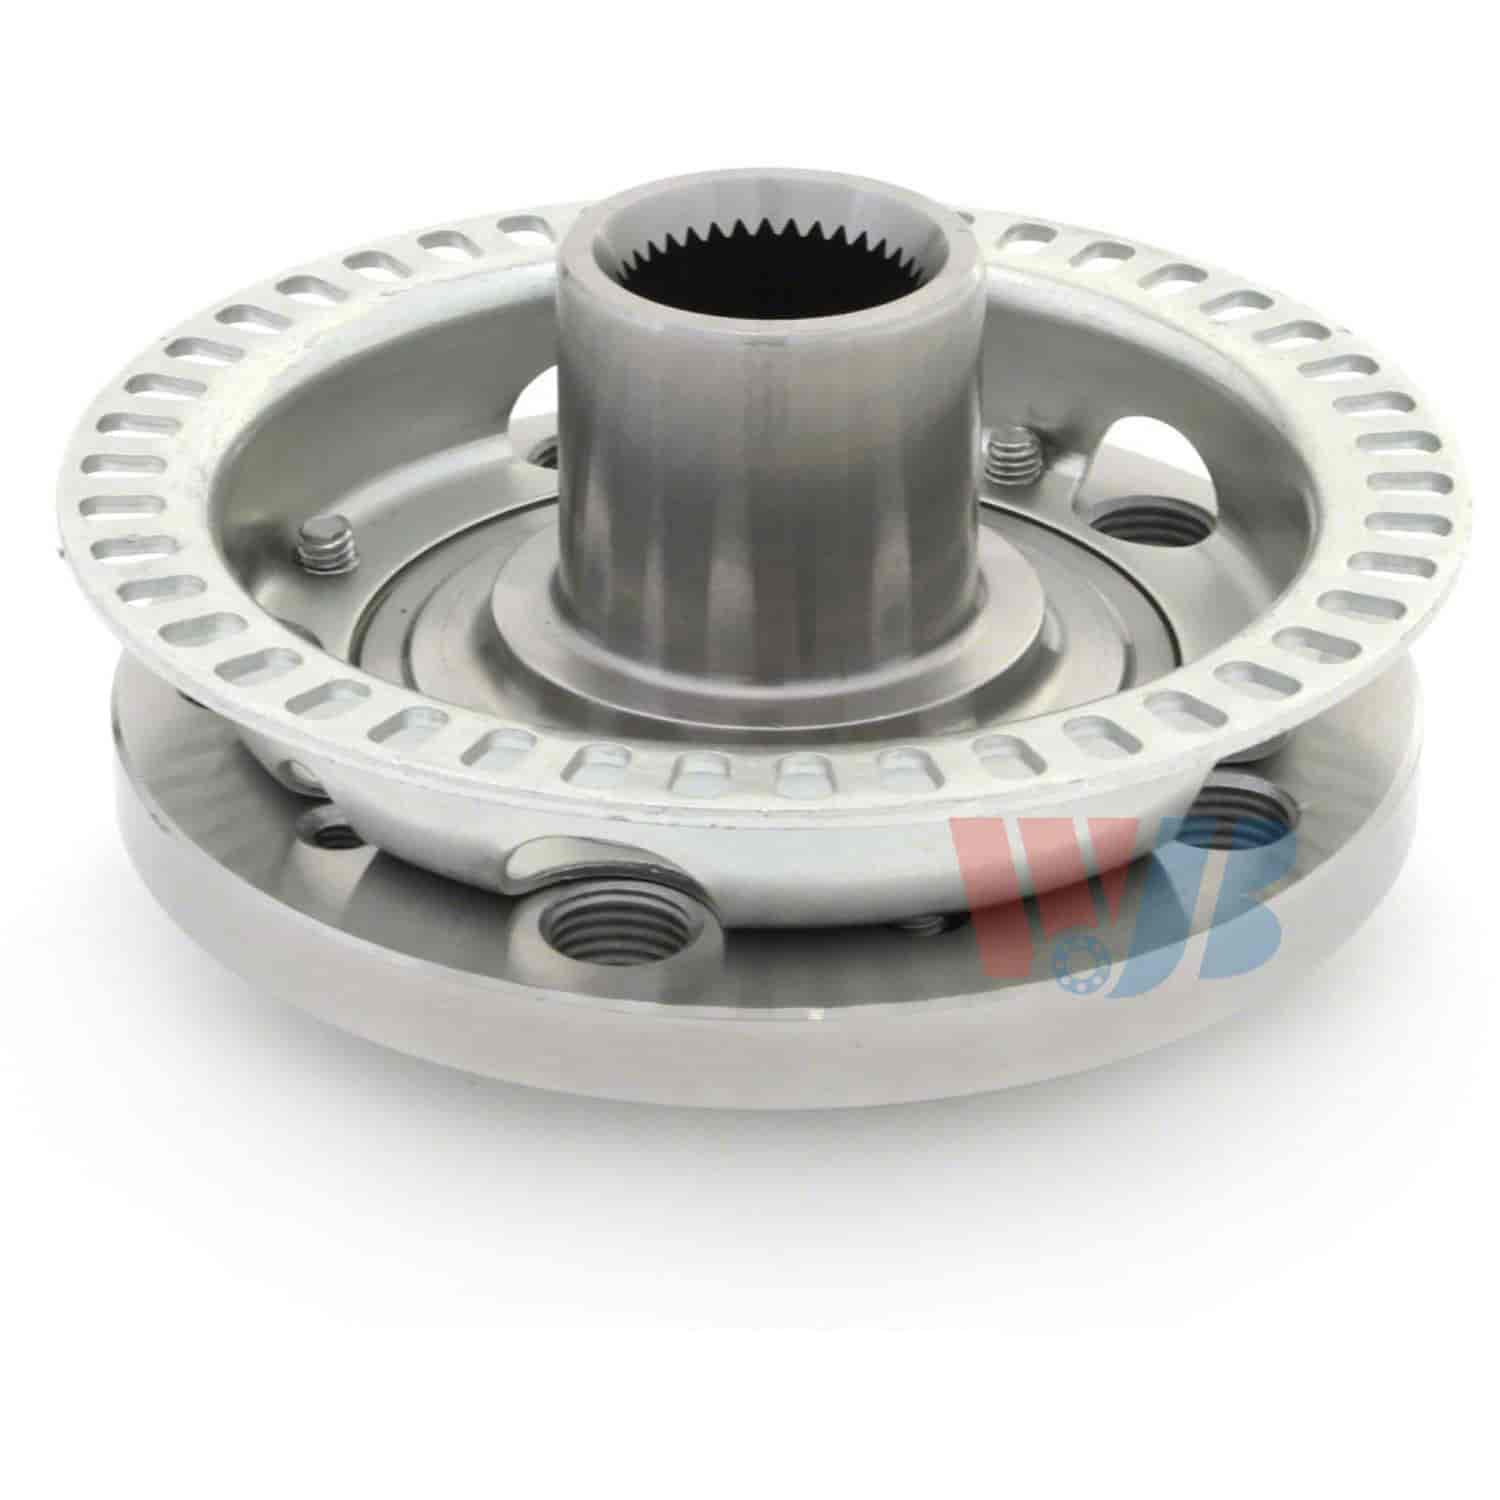 Wheel Hub Spindle only